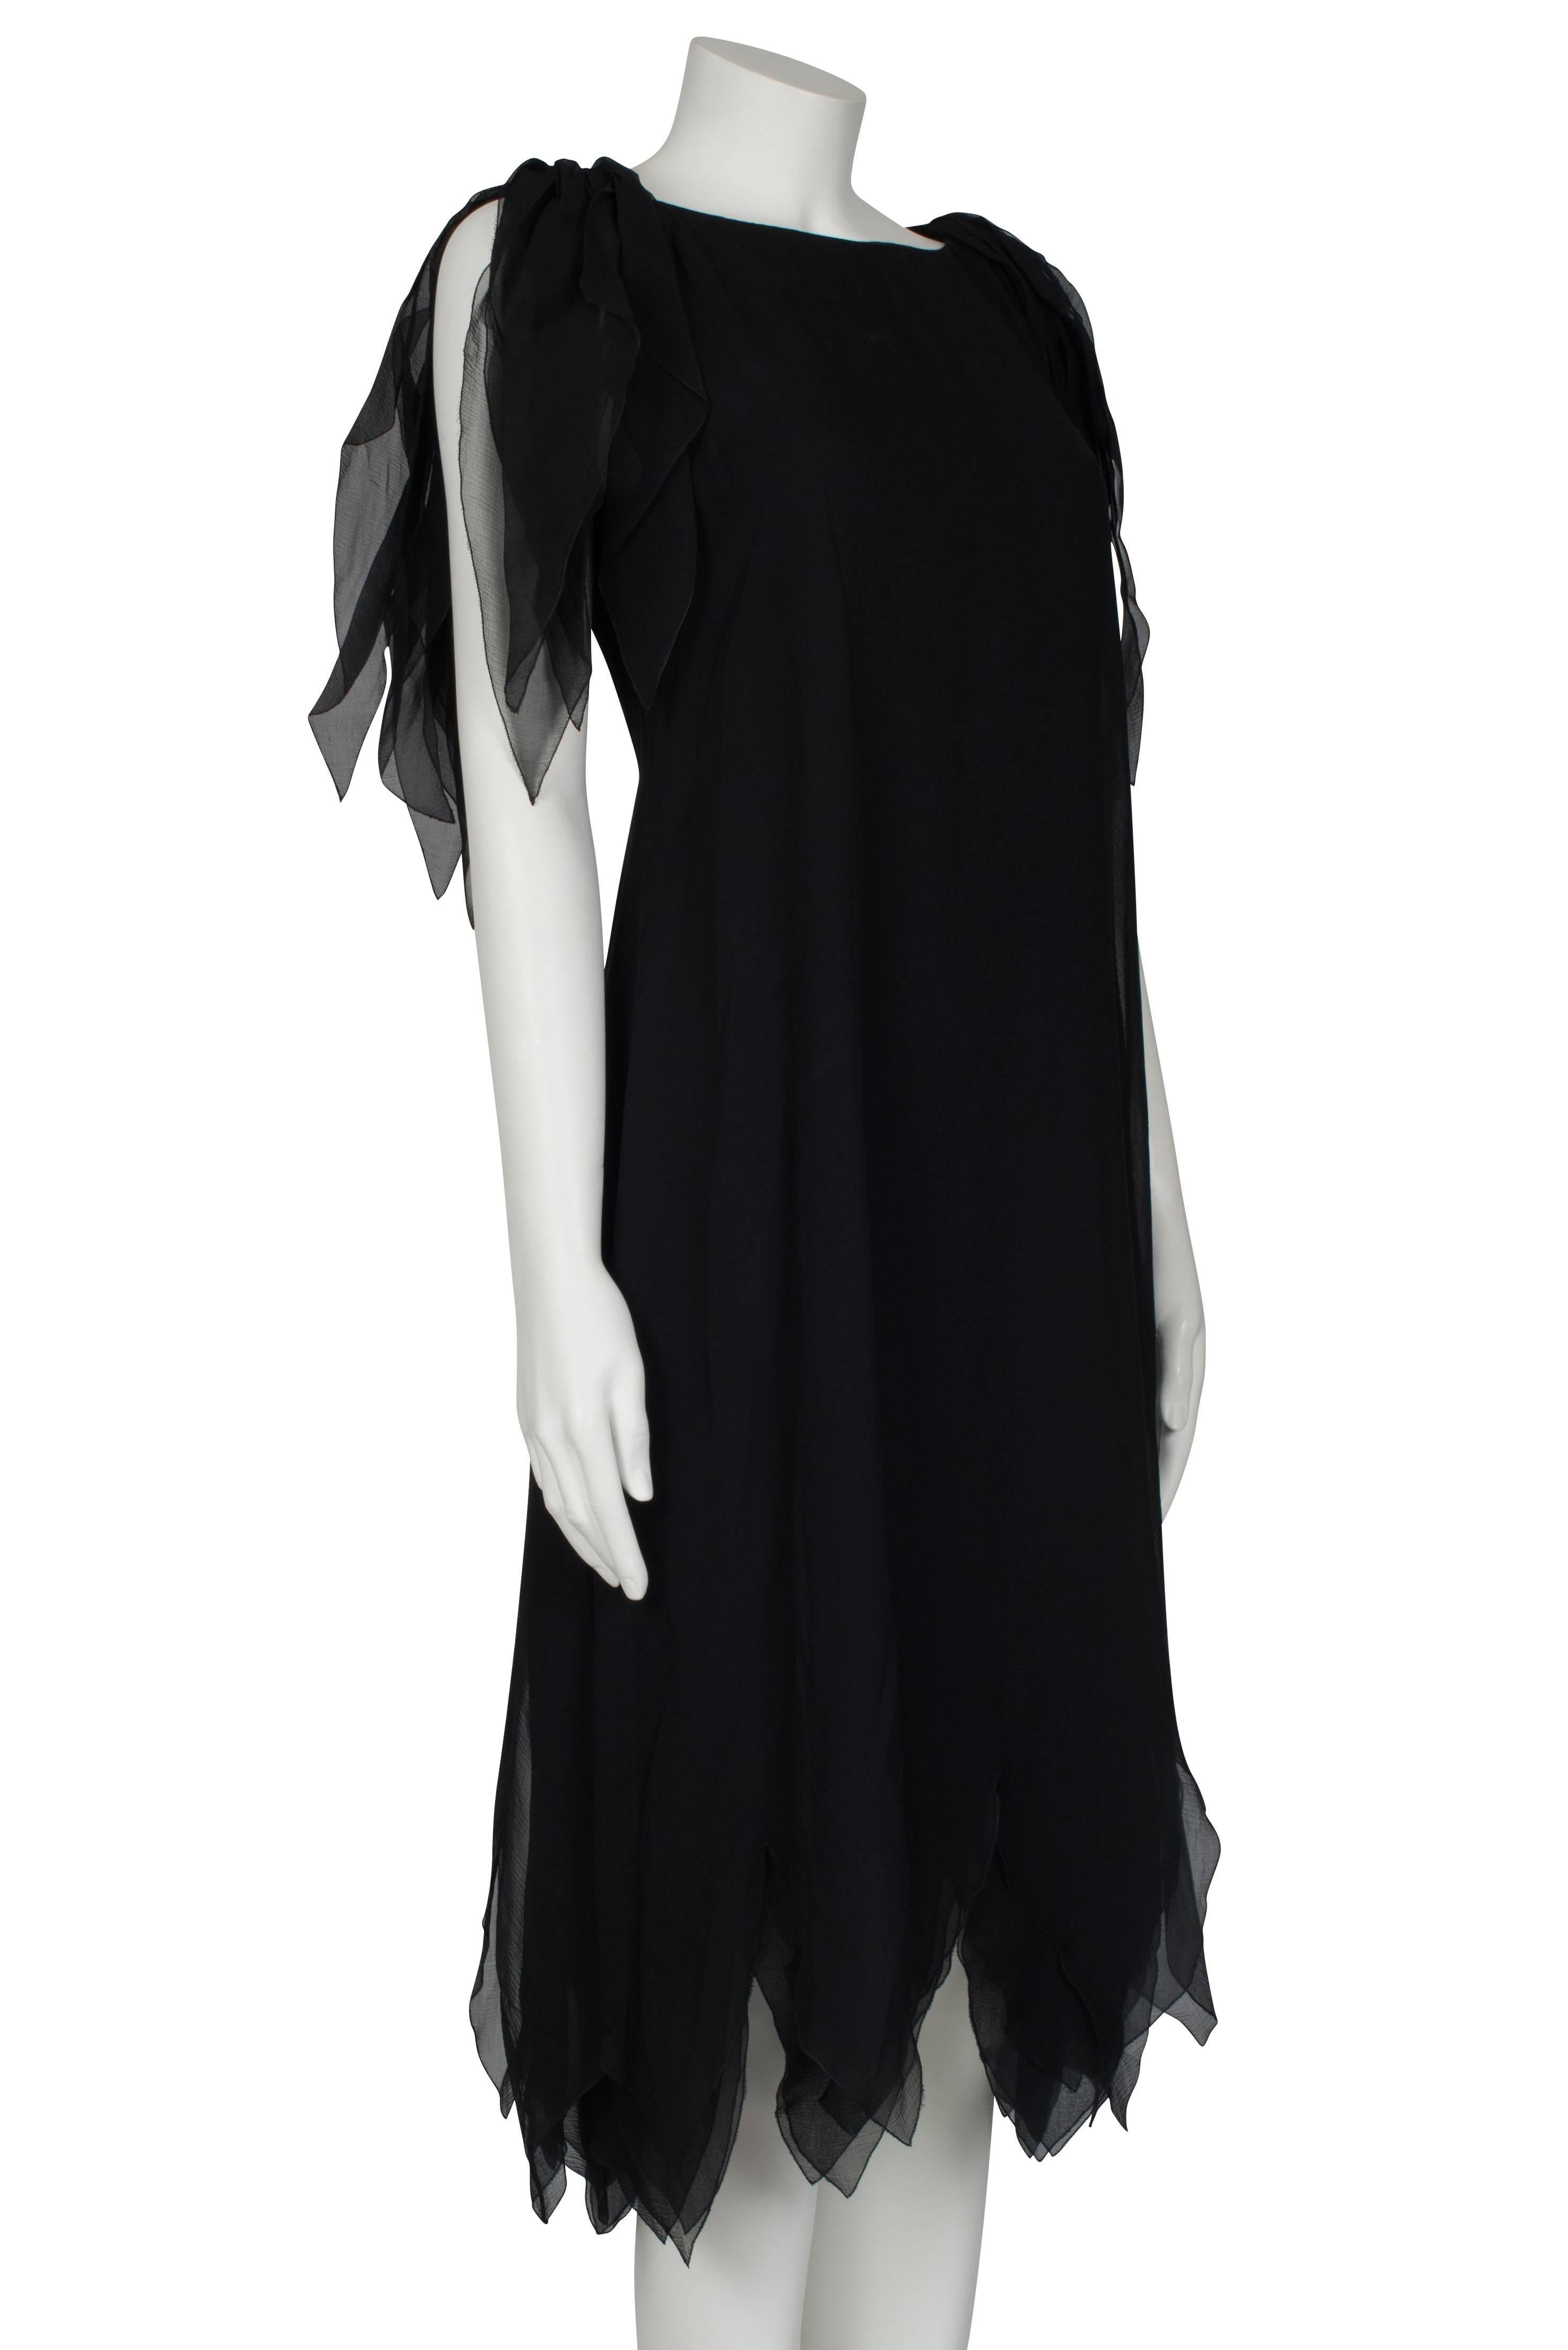 Christian Dior Couture Black Chiffon Shift Dress Spring/Summer 1980 For Sale 1